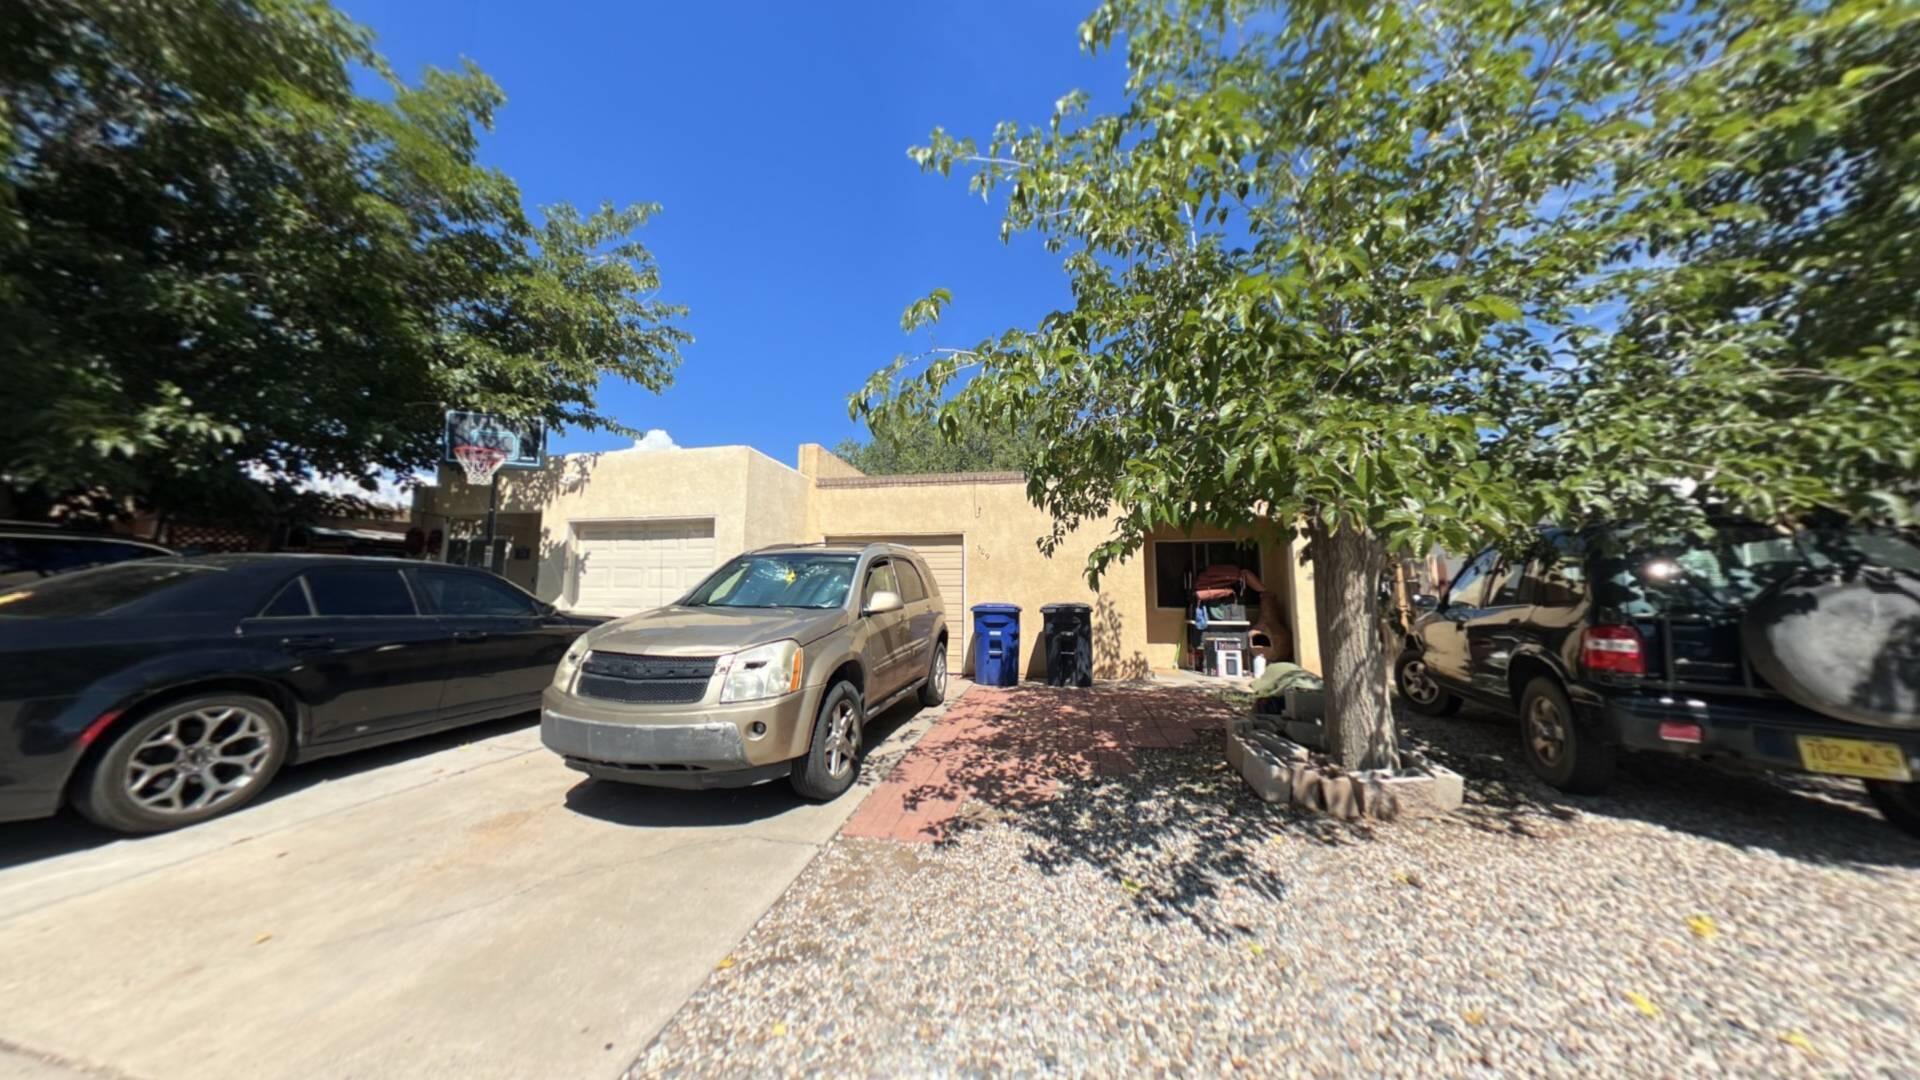 Please come tour this fixer upper. With the perfect location in the heart of Albuquerque. You will love the potential of this townhome. Ease of access to I-25 and close location to I-40 allow for the perfect hub, no matter the direction of your commute.